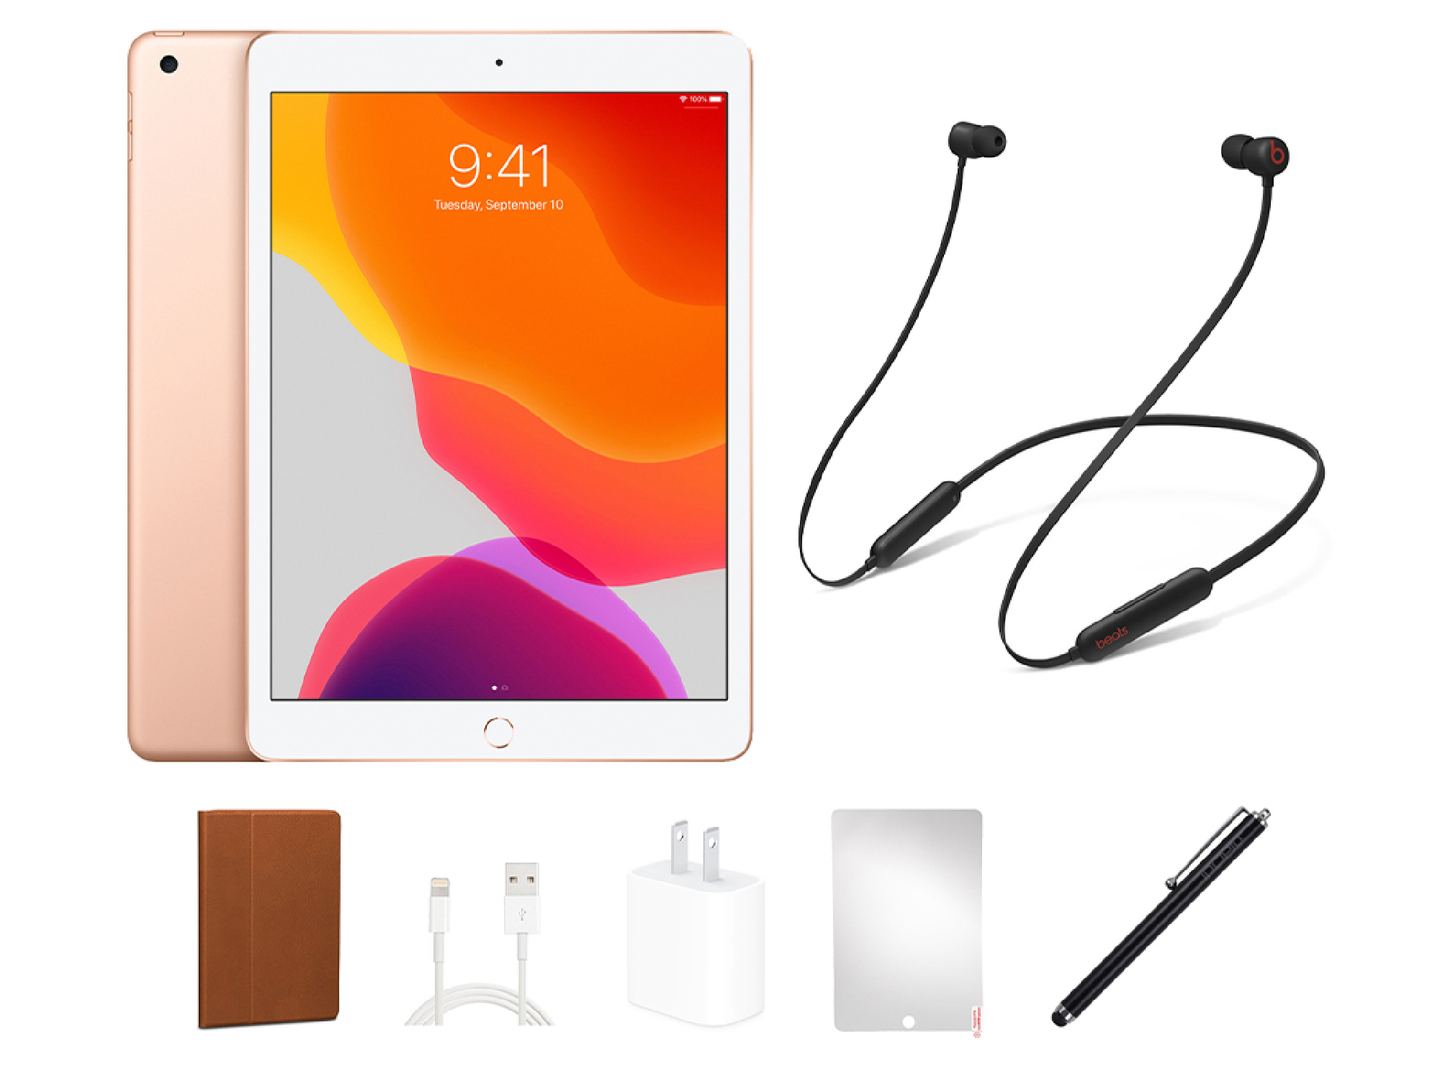 An iPad, a pair of Beats wireless headphones, and other iPad accessories on a plain background